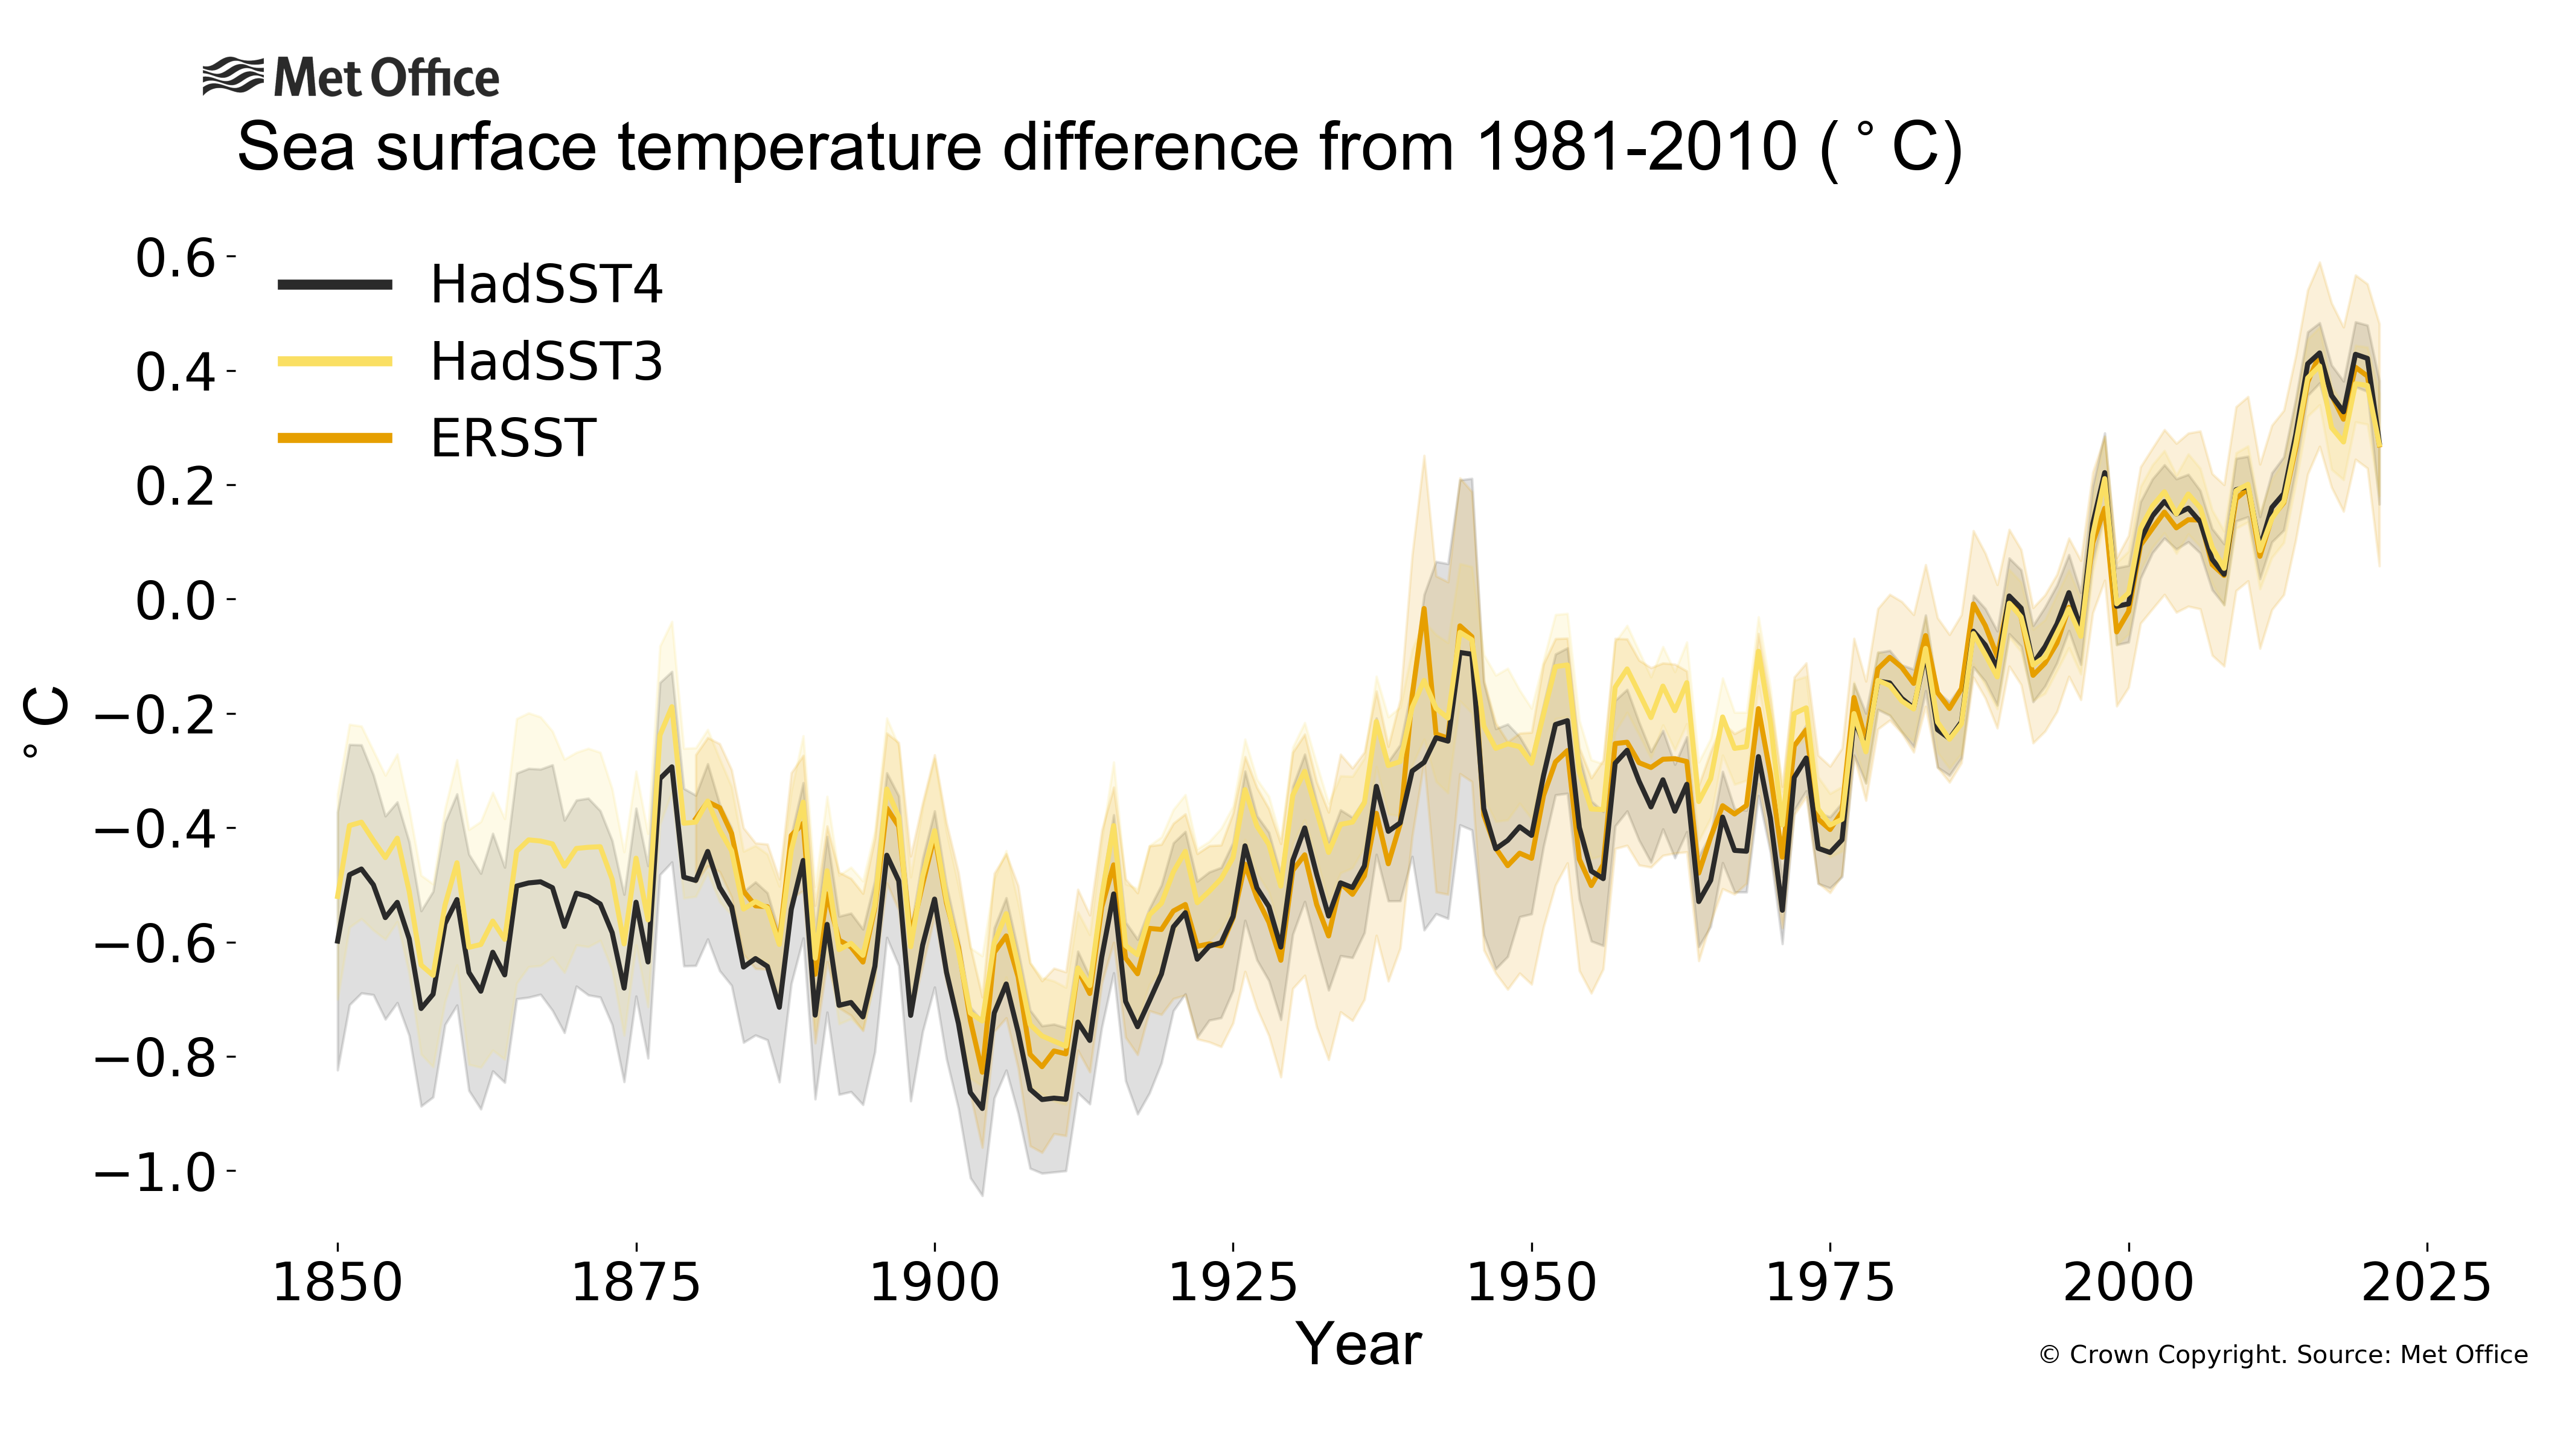 
Annual global mean sea-surface temperature difference from 1981-2010 average.
